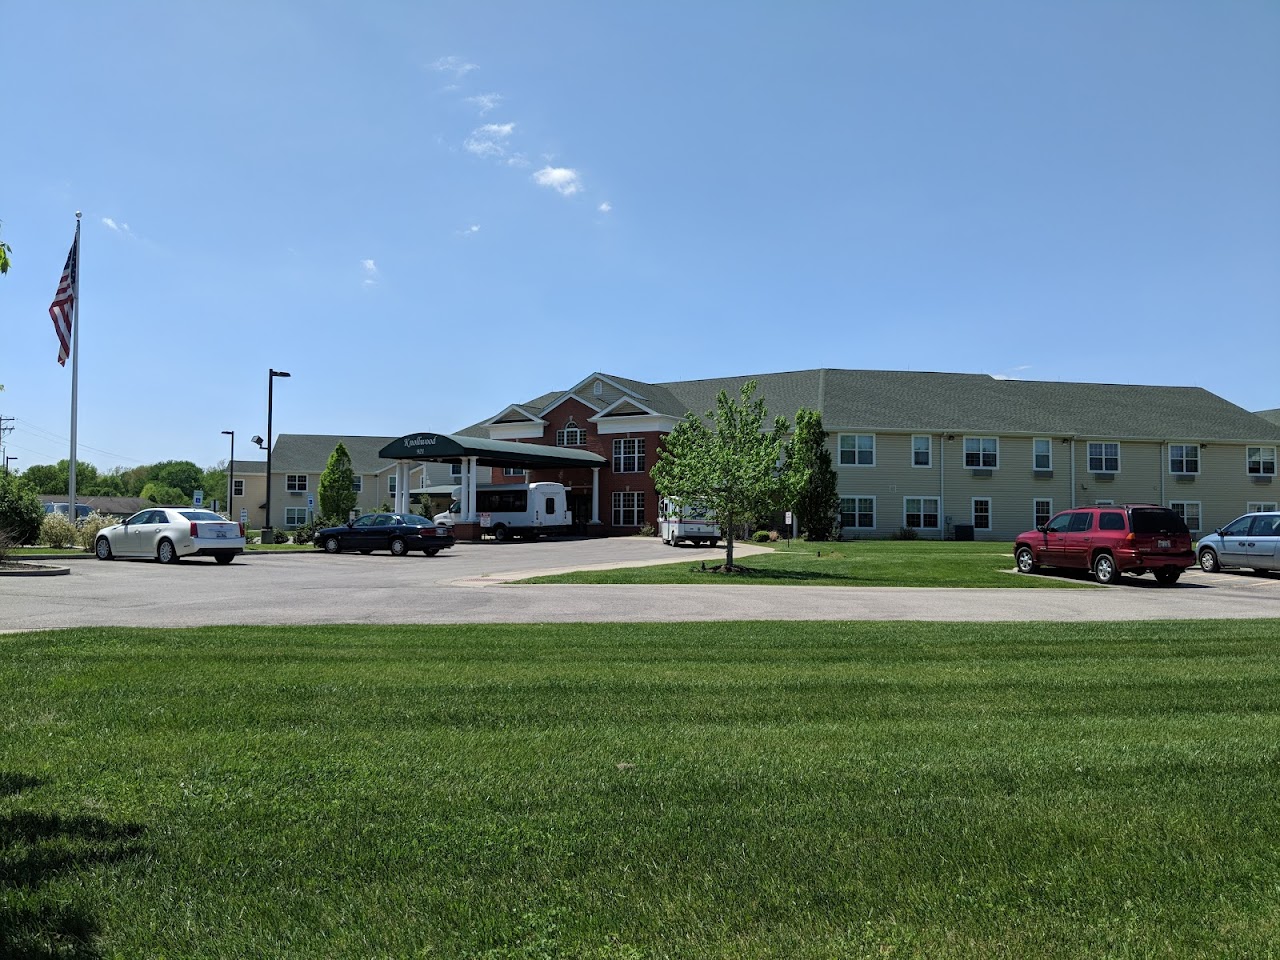 Photo of KNOLLWOOD RETIREMENT CENTER ST CLAIR. Affordable housing located at 912 KNOLLWOOD VILLAGE RD CASEYVILLE, IL 62232